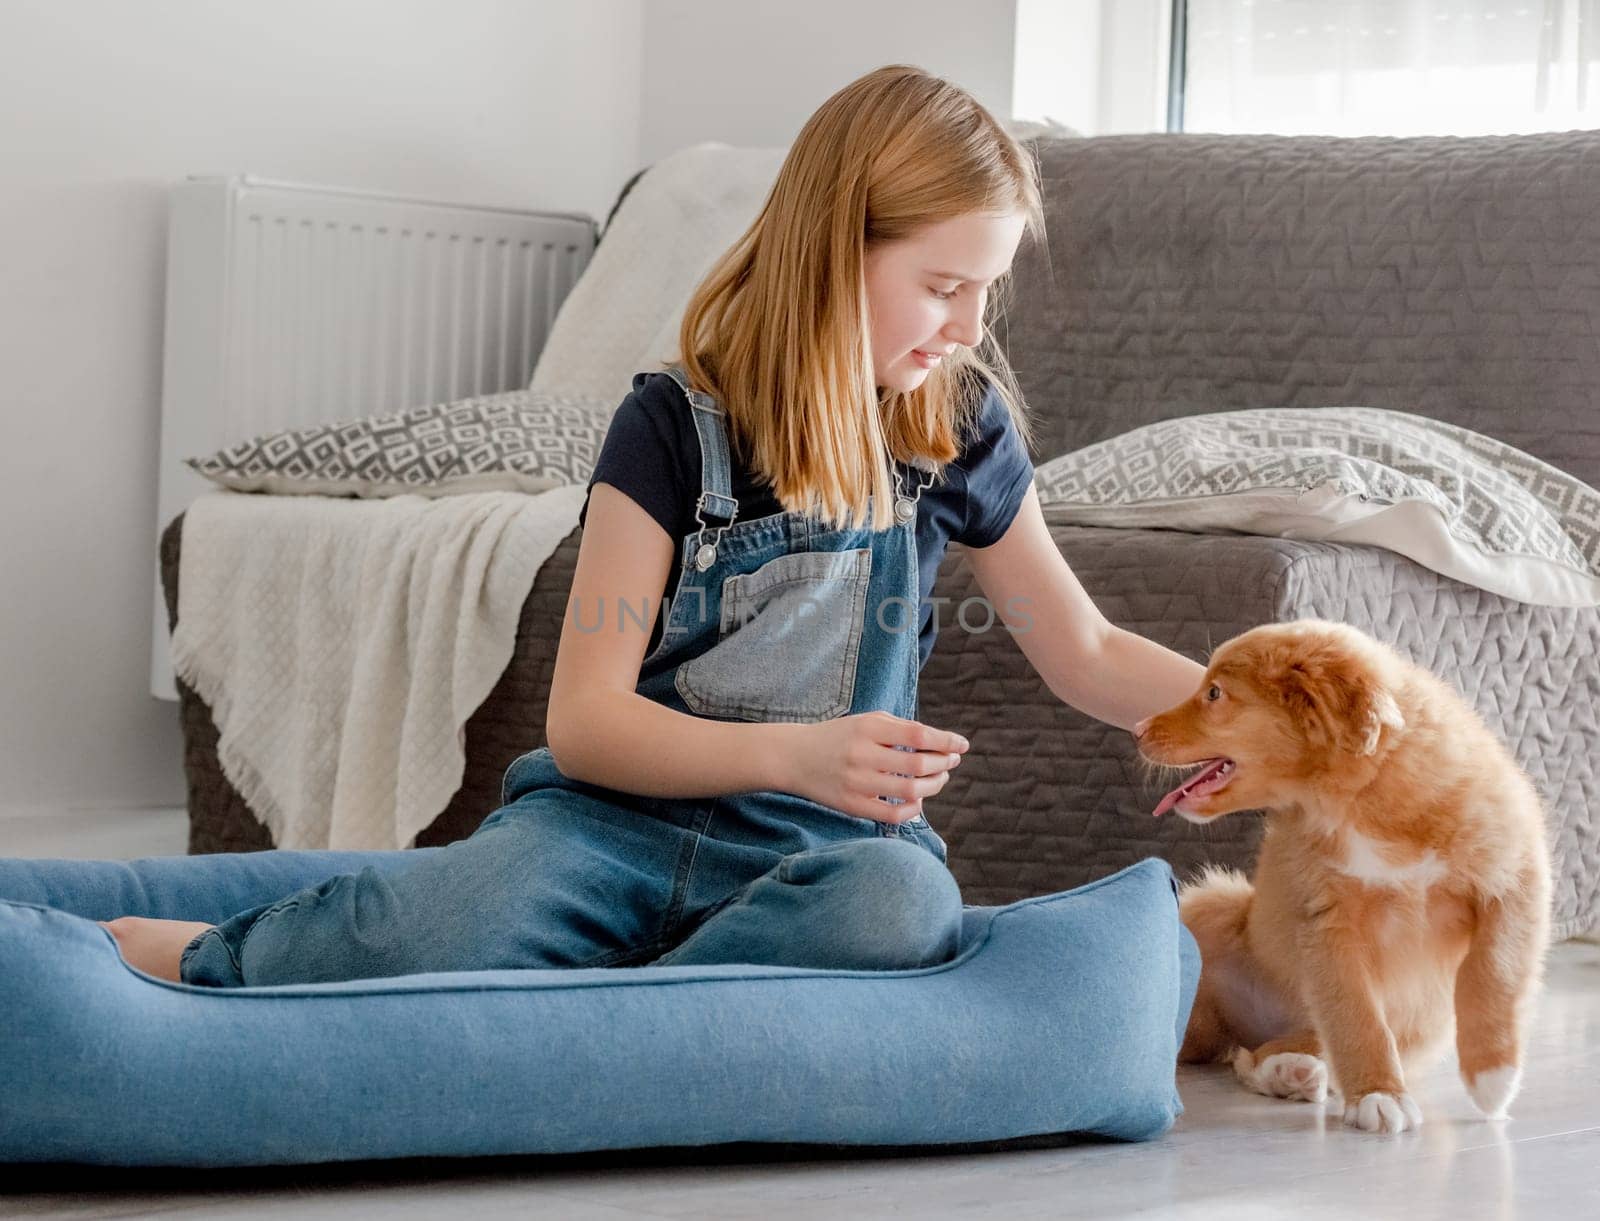 Little Girl With Toller Puppy Sitting In Blue Dog Bed by tan4ikk1